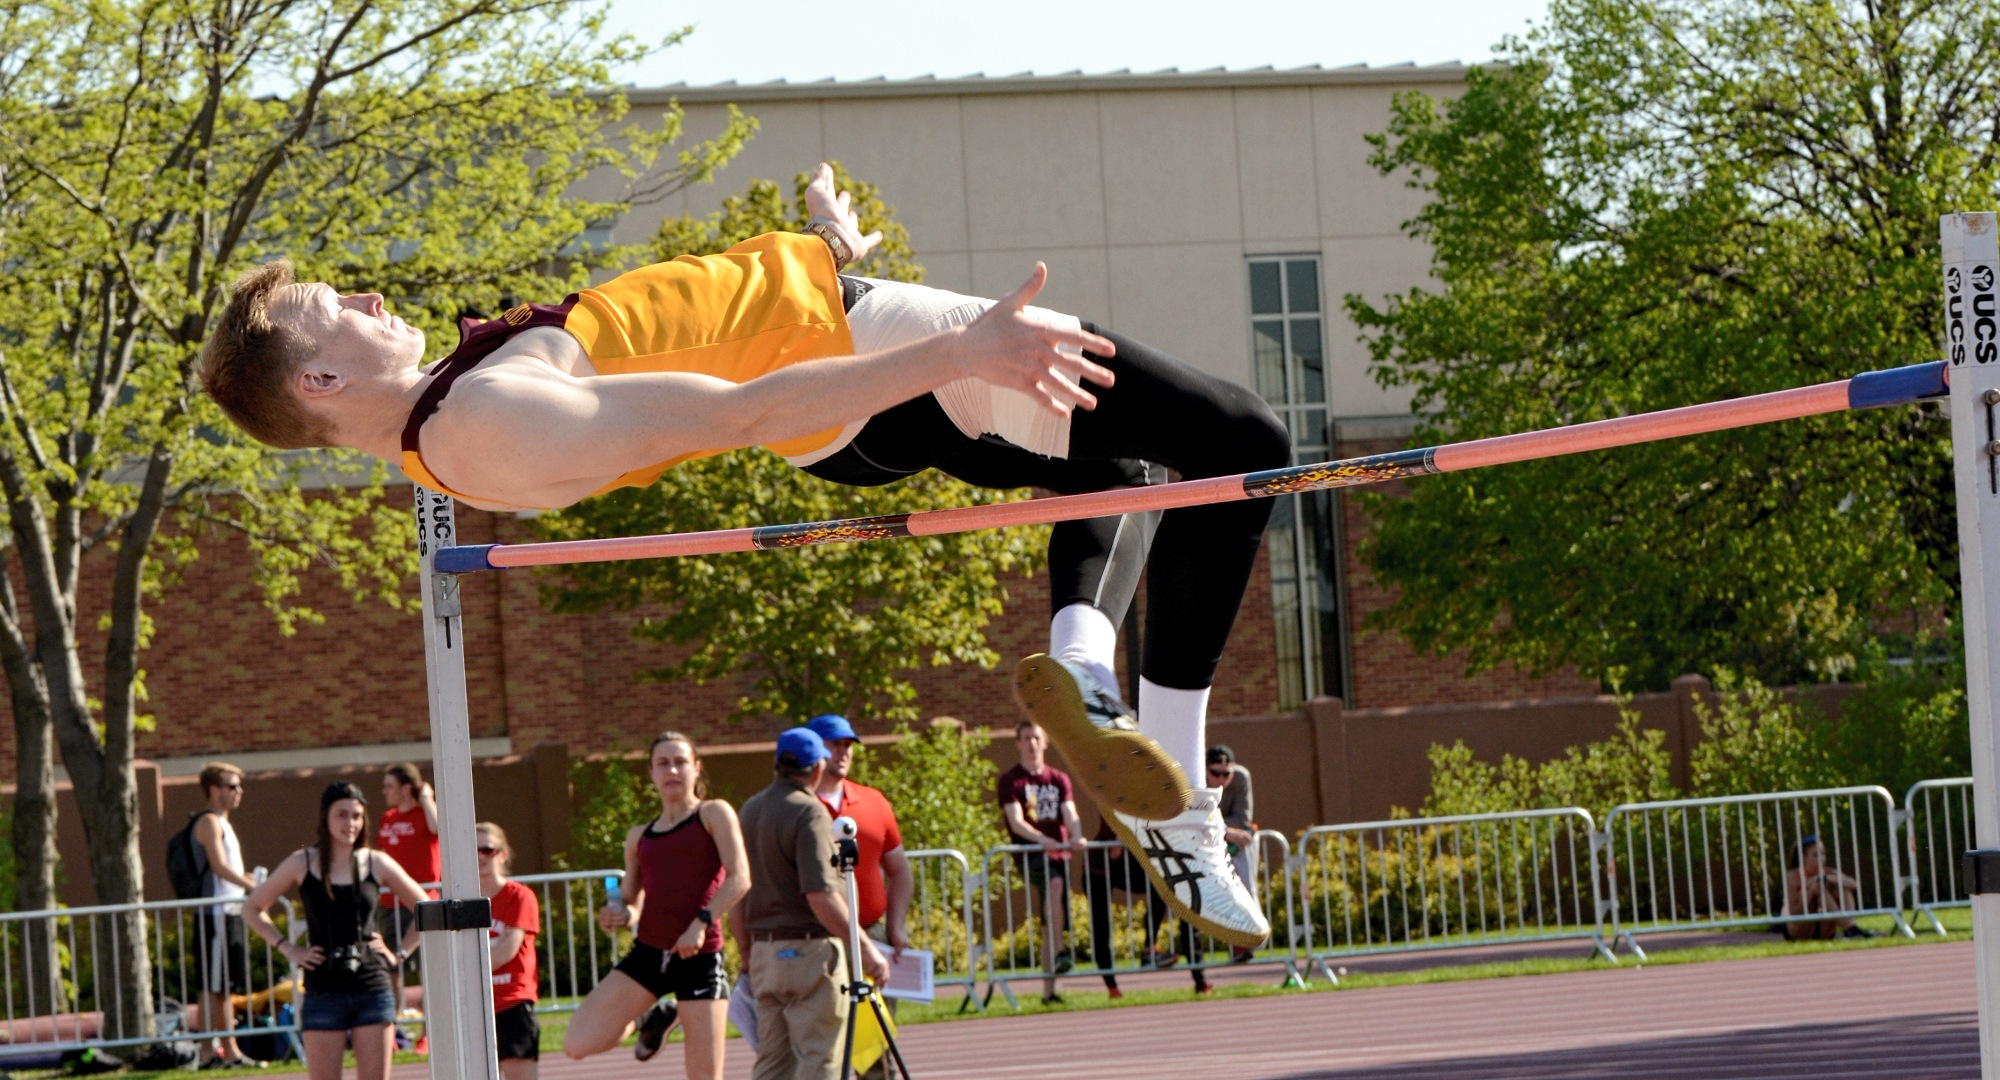 Jackson Schepp clears the bar on his way to winning the high jump on Day 1 at the MIAC Championship Meet. (Photo courtesy of Hamline Sports Info Dept.)